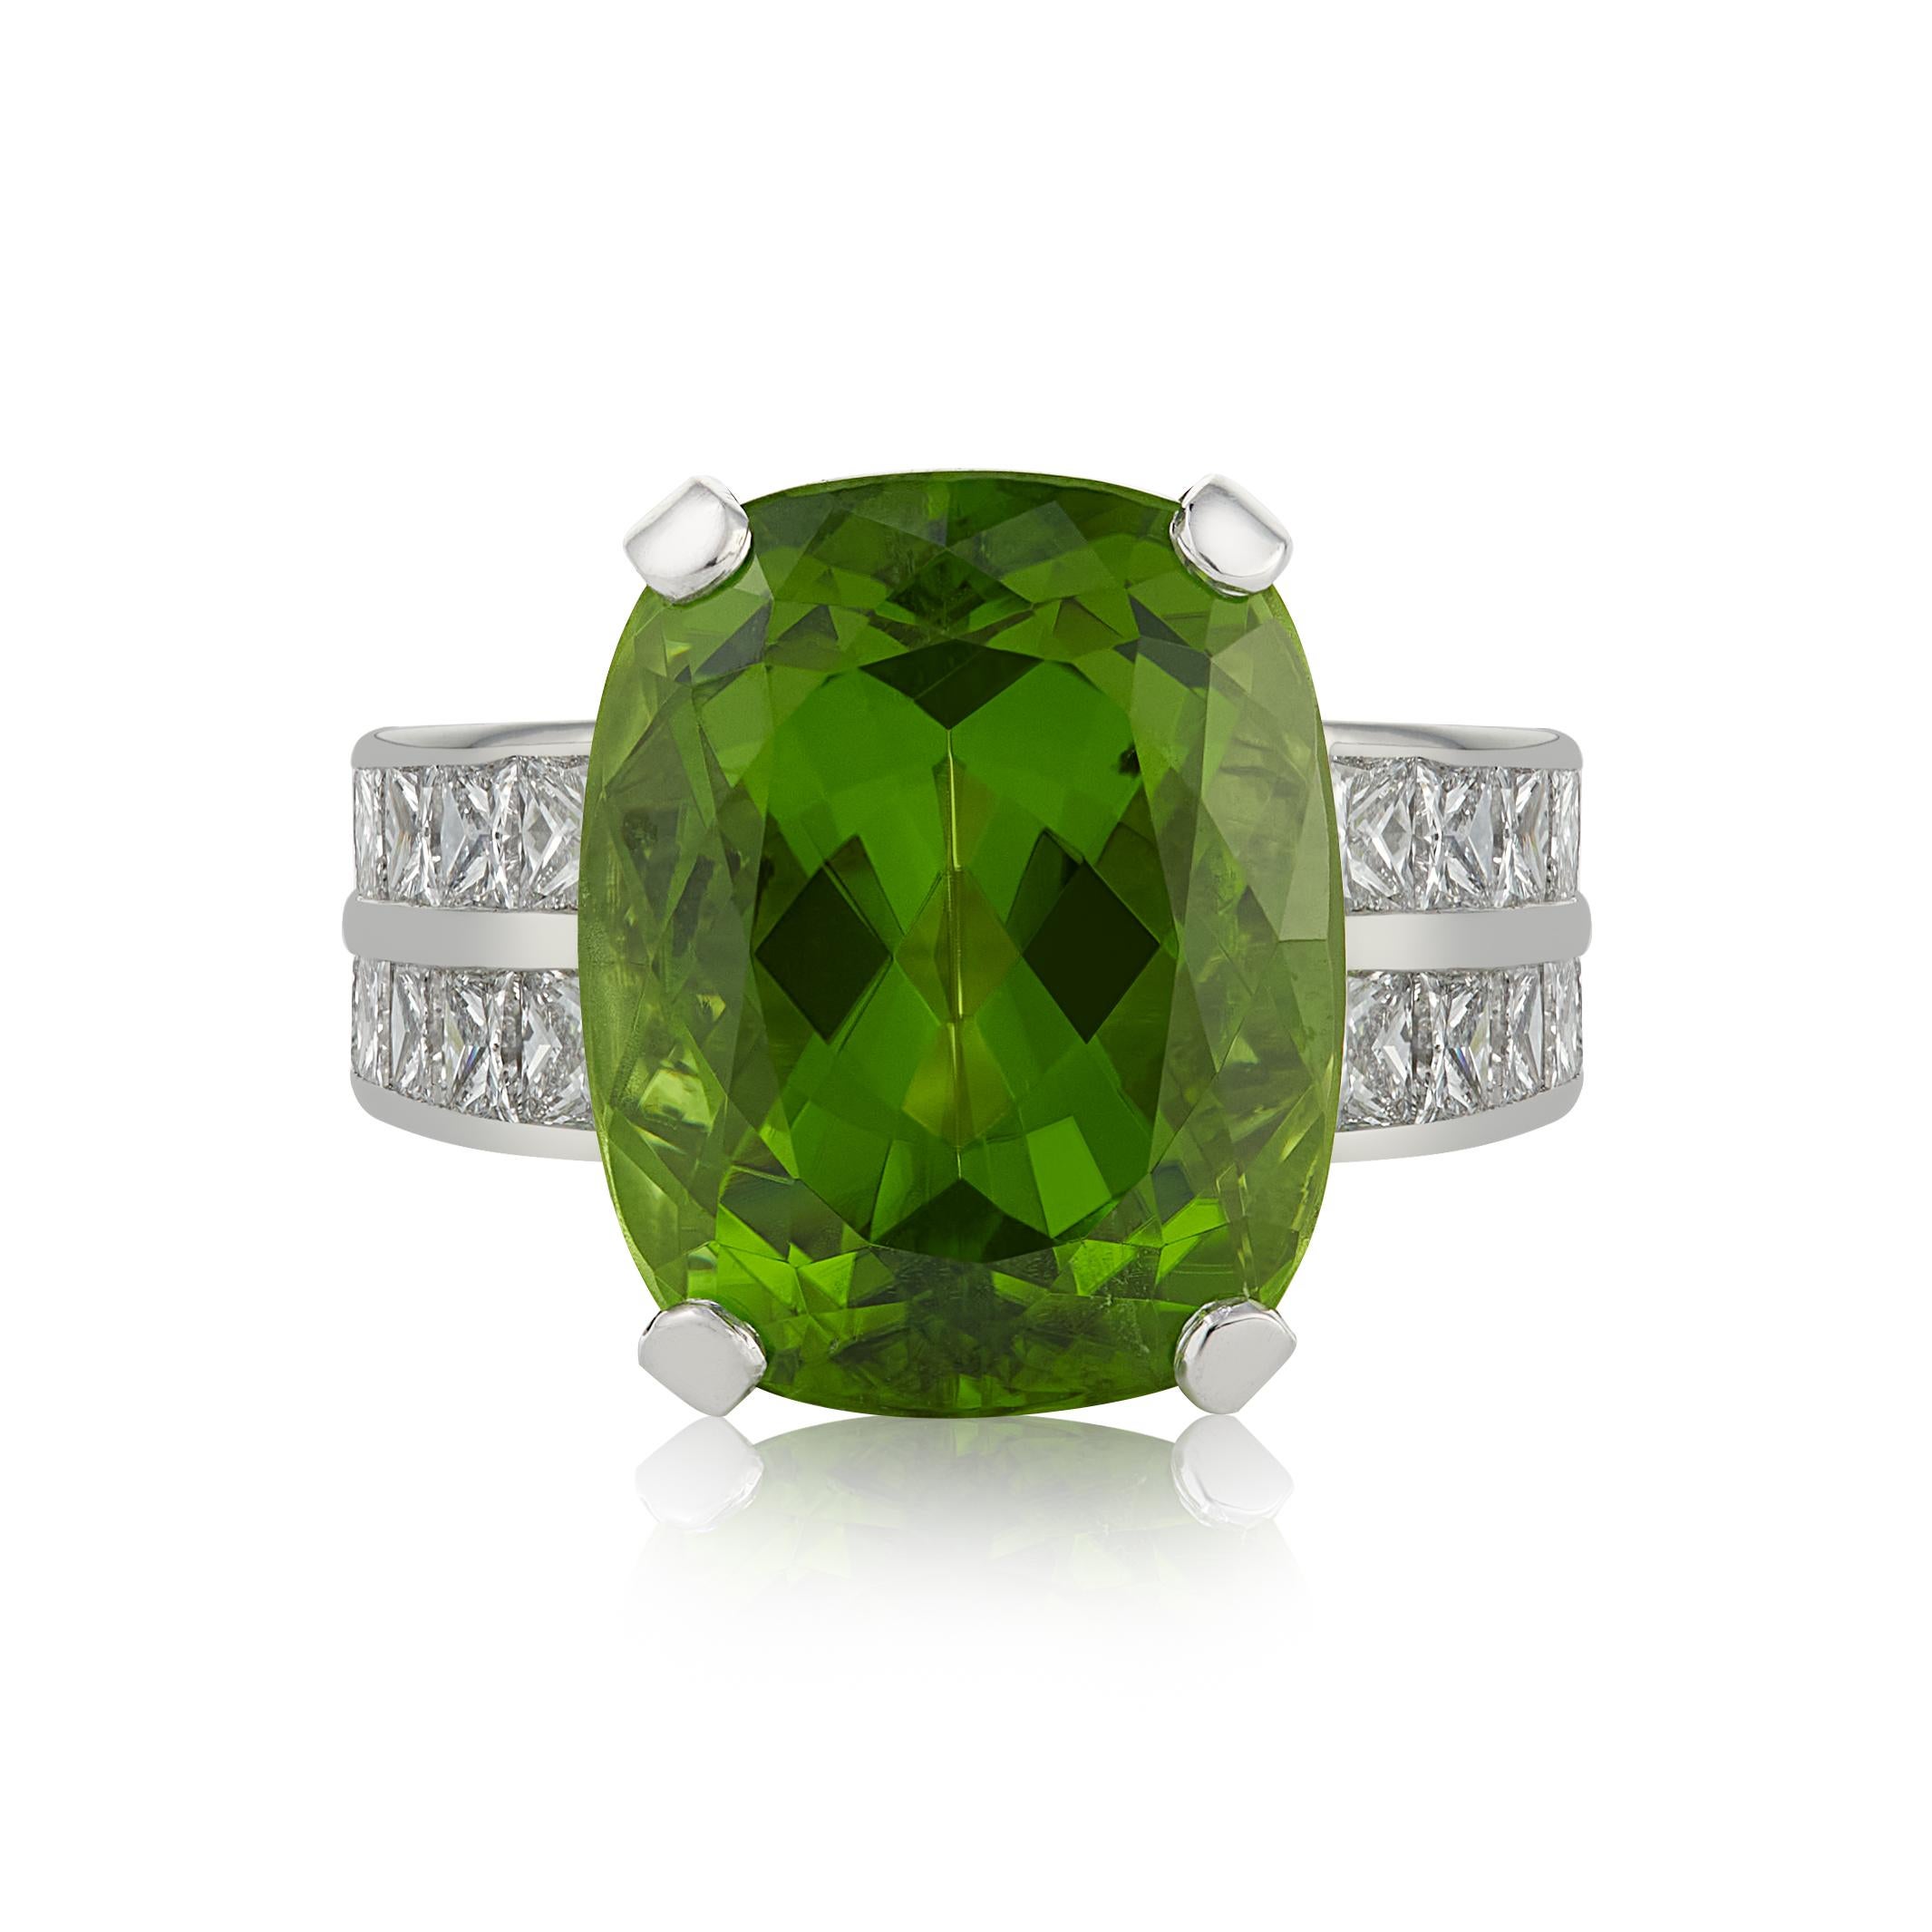 E Wolfe & Co Handmade 18ct White Gold Peridot and Diamond Cocktail Ring. The peridot centre stone weighs 12.33 carats, is of extremely good colour and has two rows of princess-cut diamonds set to either side of the white gold ring band. The